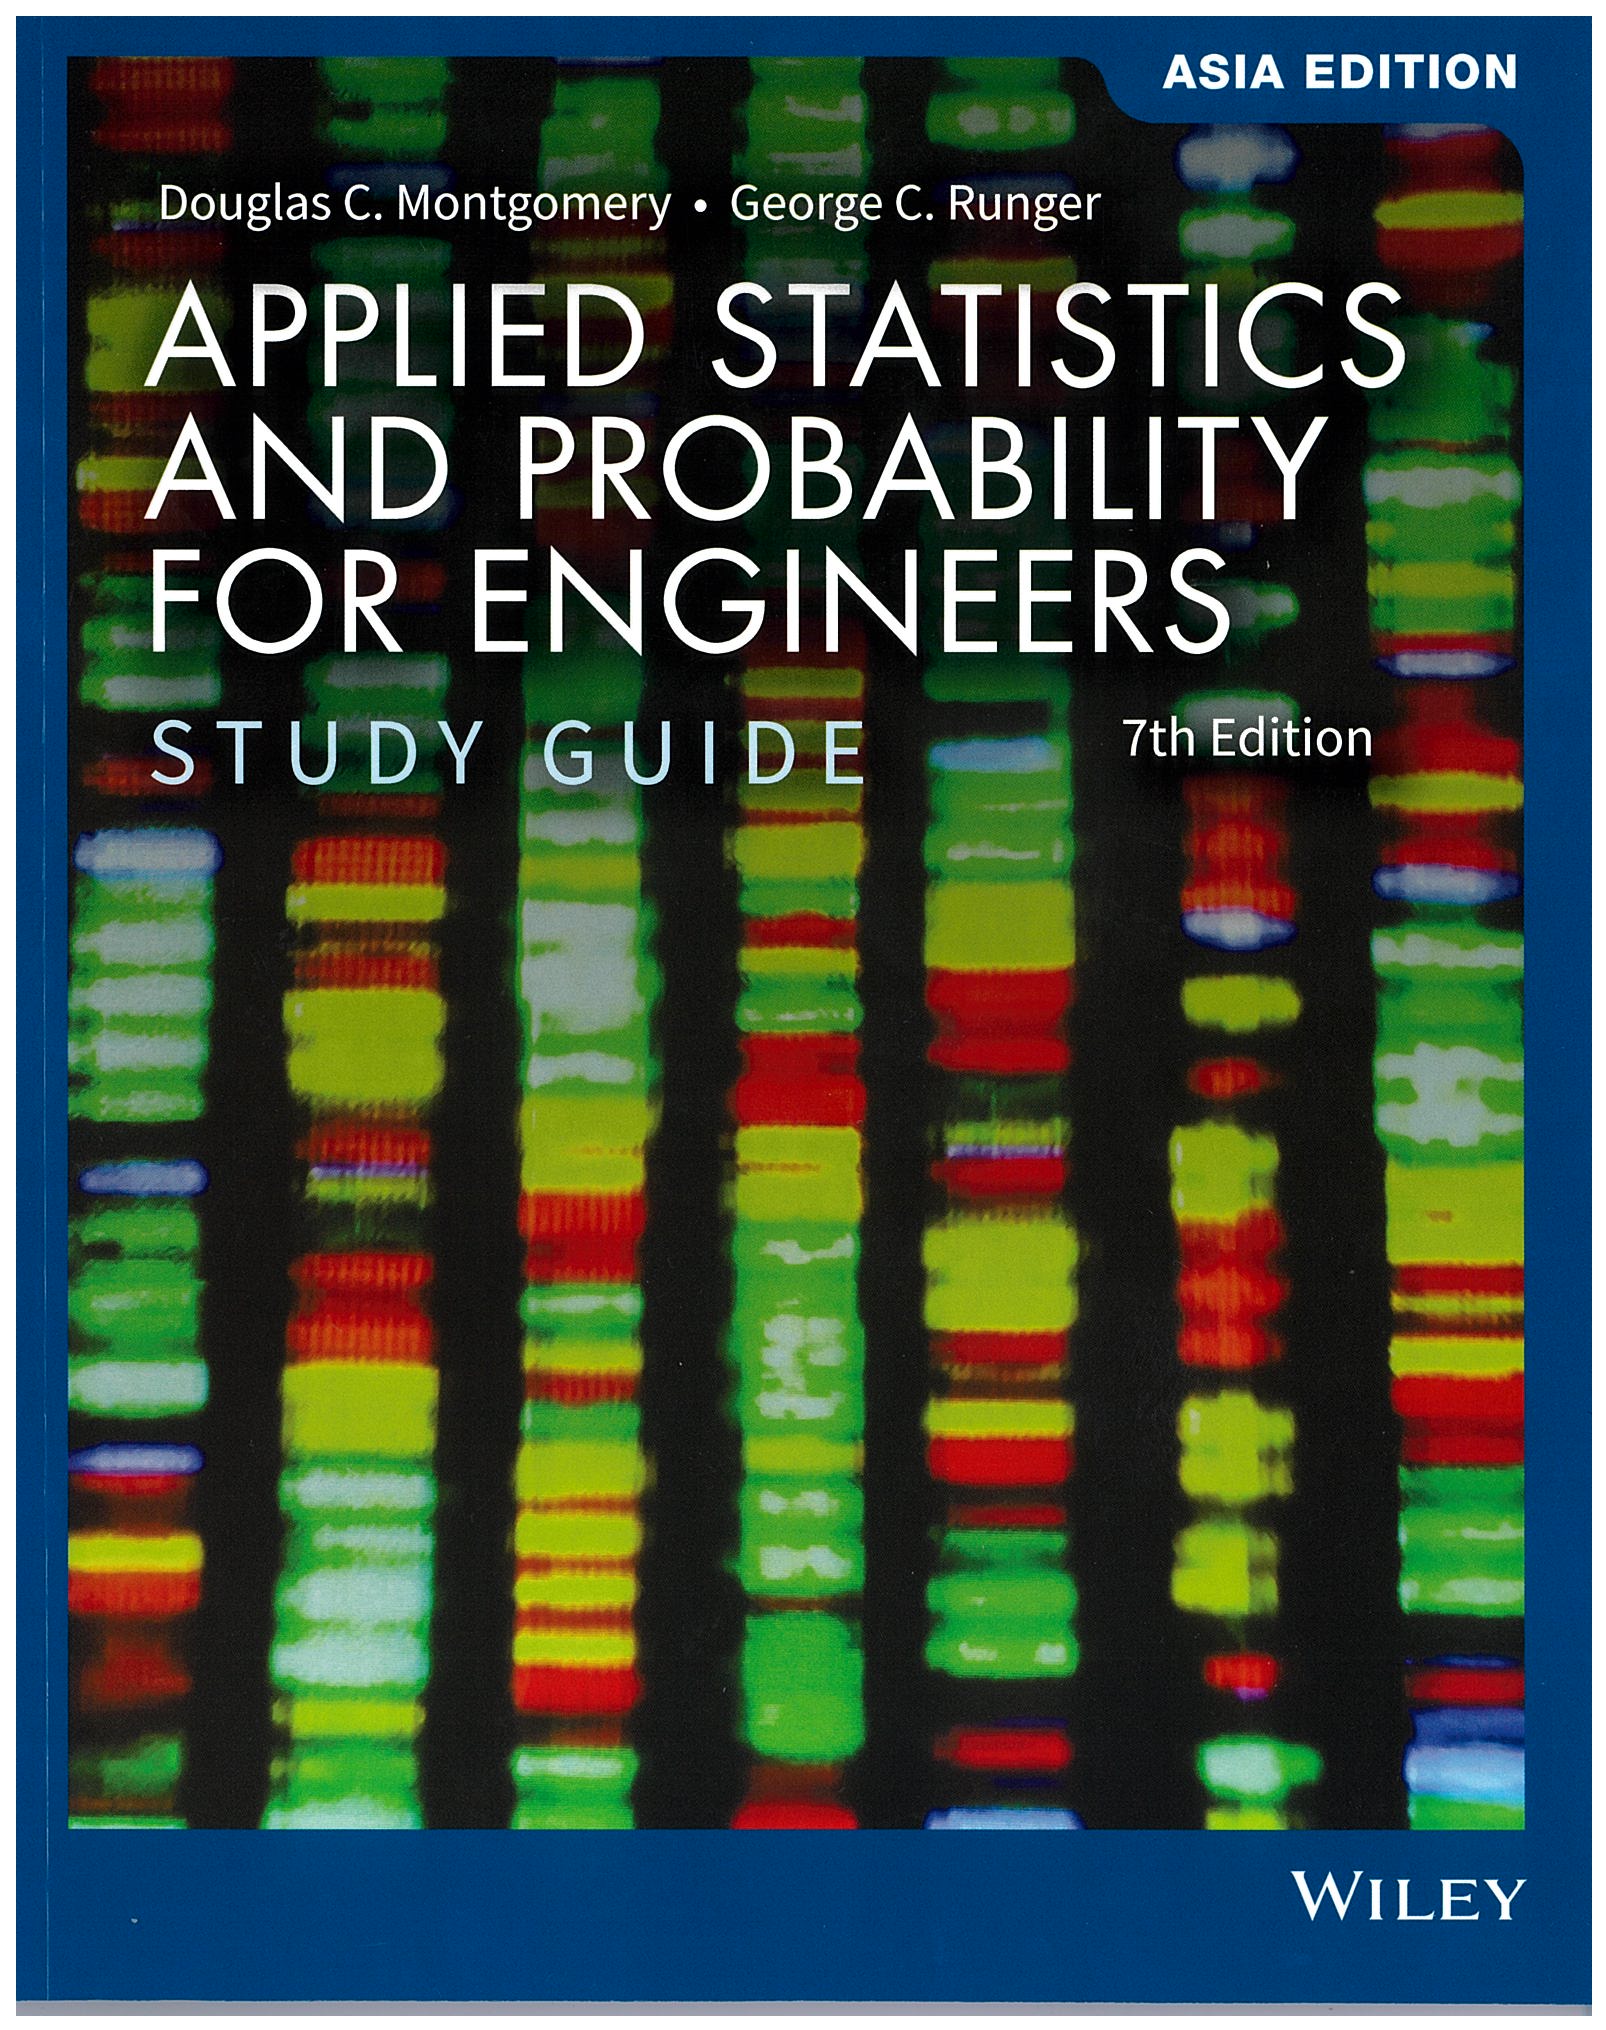 Applied Statistics and Probability for Engineers 7th study guide (Asia edition)